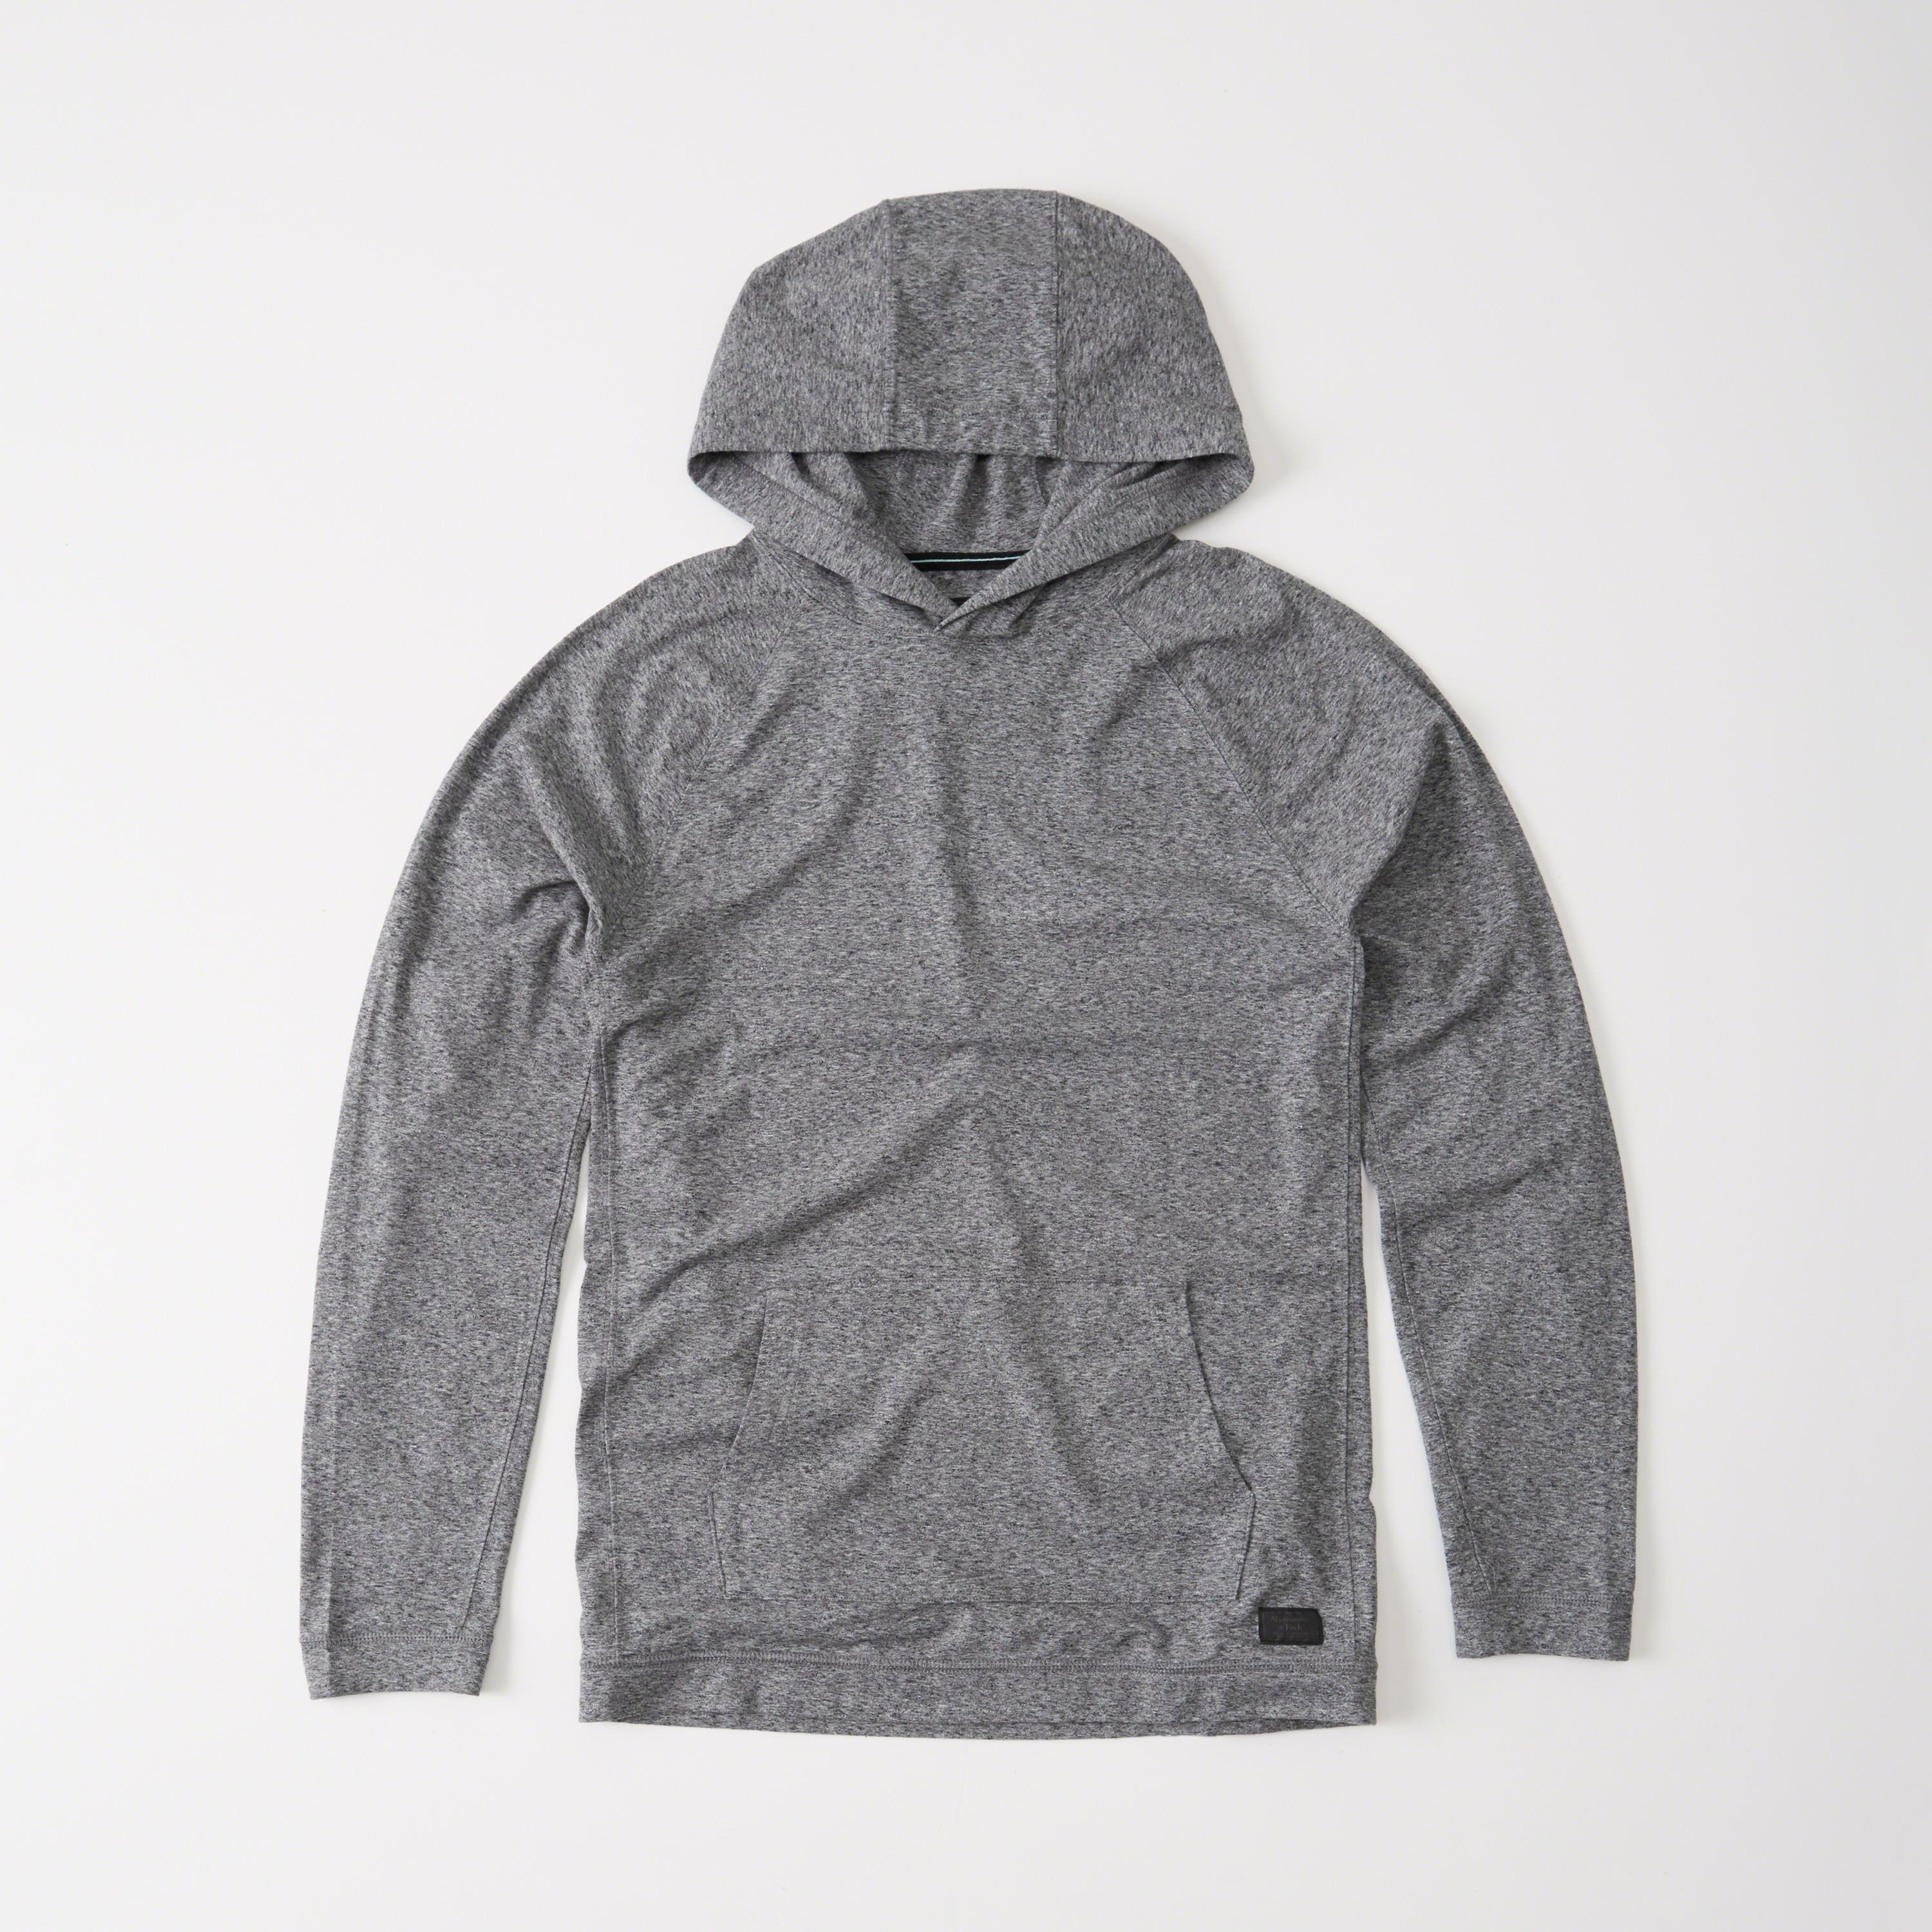 Lyst - Abercrombie & Fitch Lightweight Sport Hoodie in Gray for Men